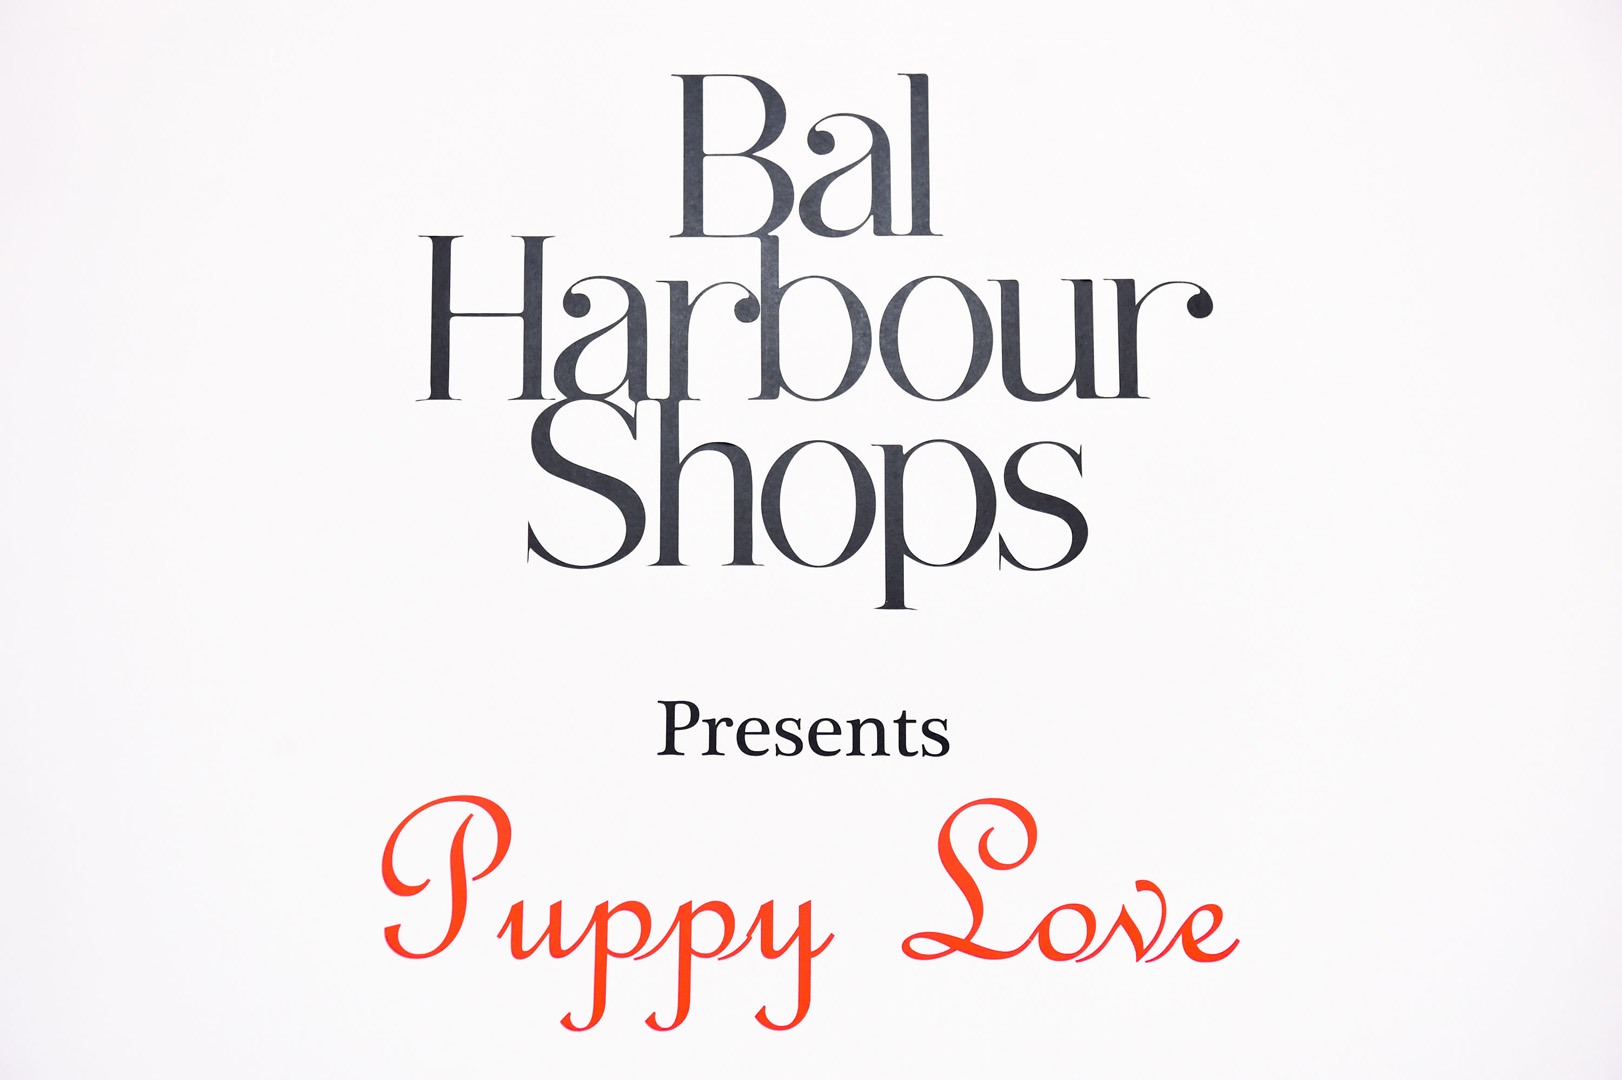 Bal Harbour Shops partnered with Walk in Style for the Animals to host Puppy Love on Wednesday, February 12th benefiting Big Dog Ranch Rescue